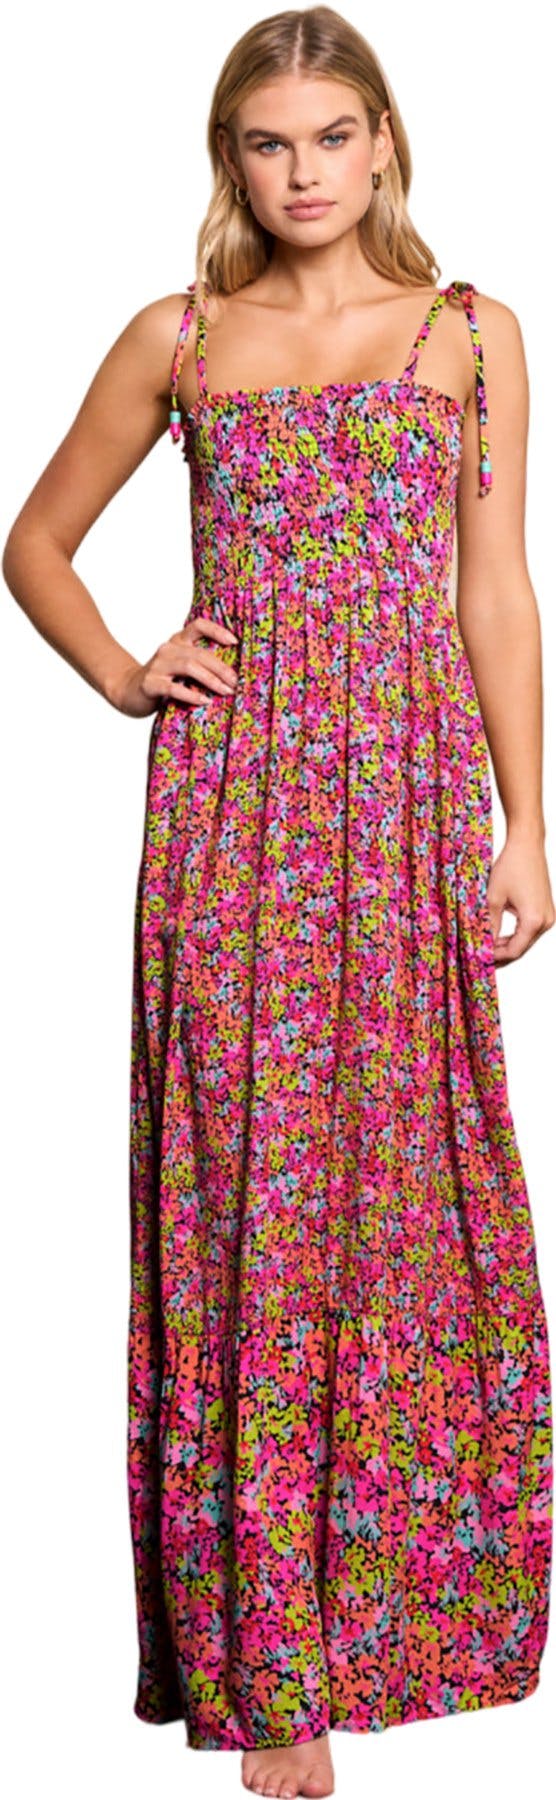 Product image for Bewitched Monet Long Dress - Women's